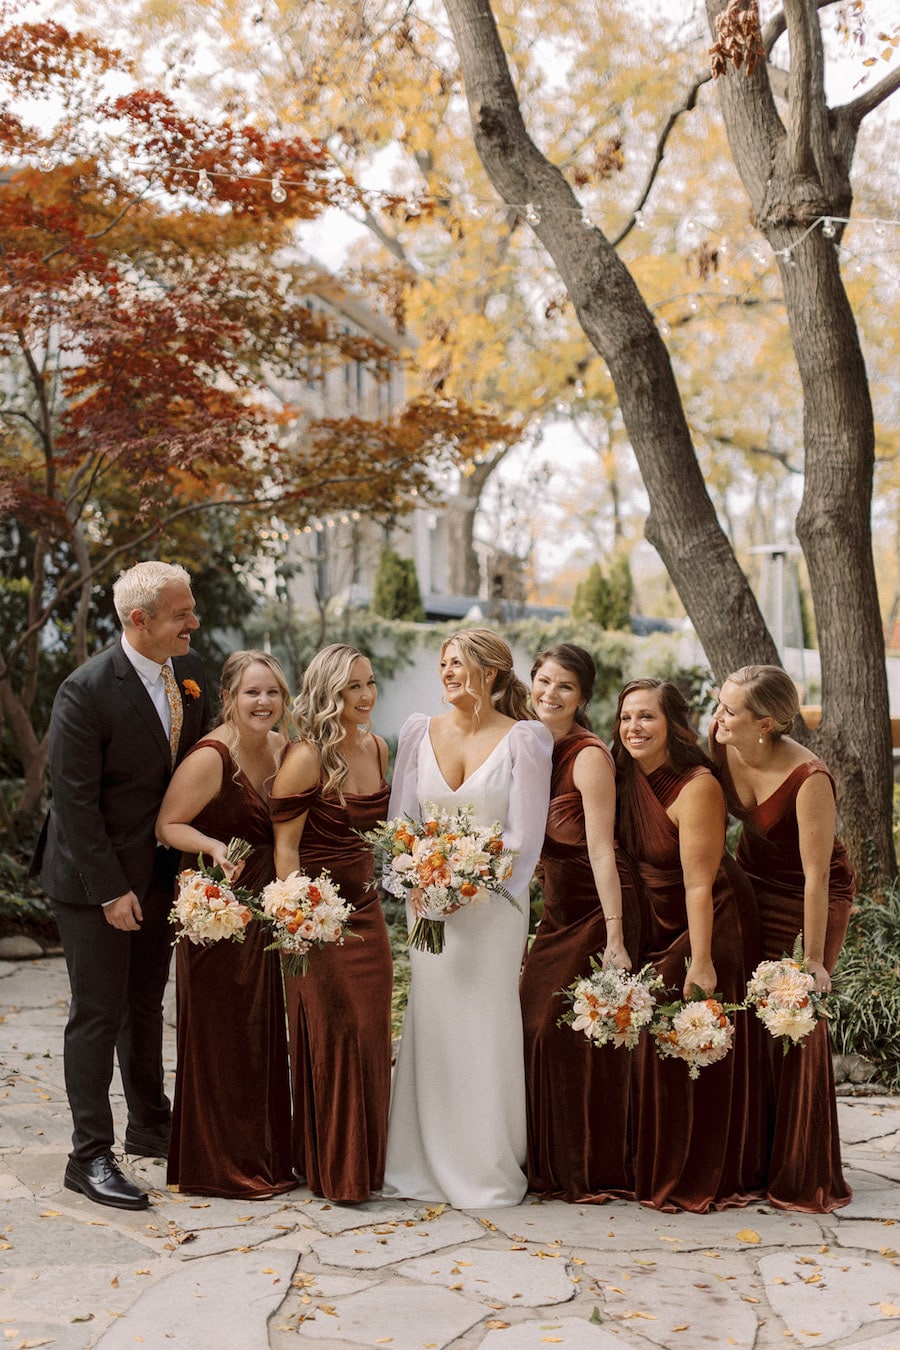 Nashville wedding venue that’s perfect for outdoor ceremony and reception with neutral colors